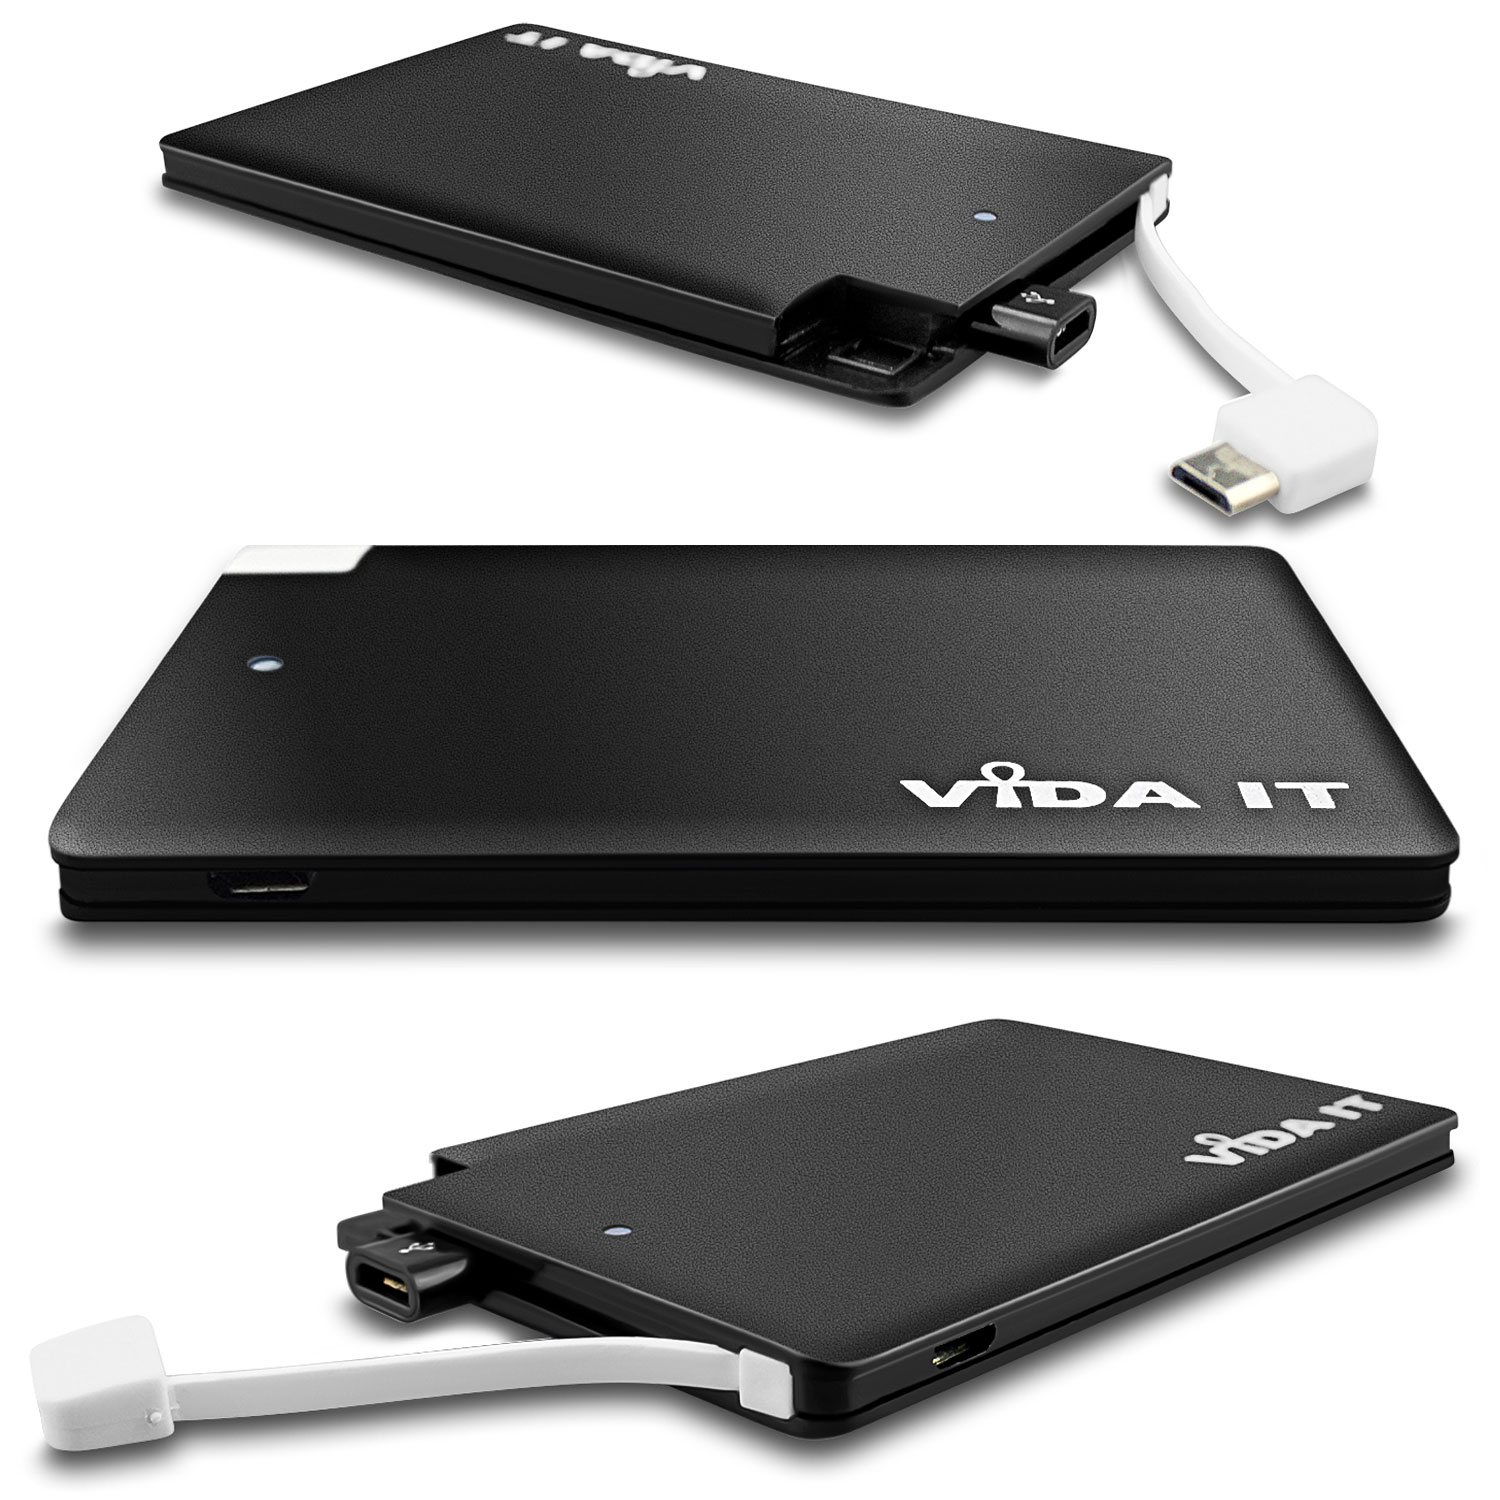 vCard slim Power Bank 2500mAh Capacity USB external battery pack thin portable USB charger with built-in micro-usb charging cable plus two adapters for iPhone and type-C usb-c connectors for iPhone iPad Android mobile phone smartphone tablet pc